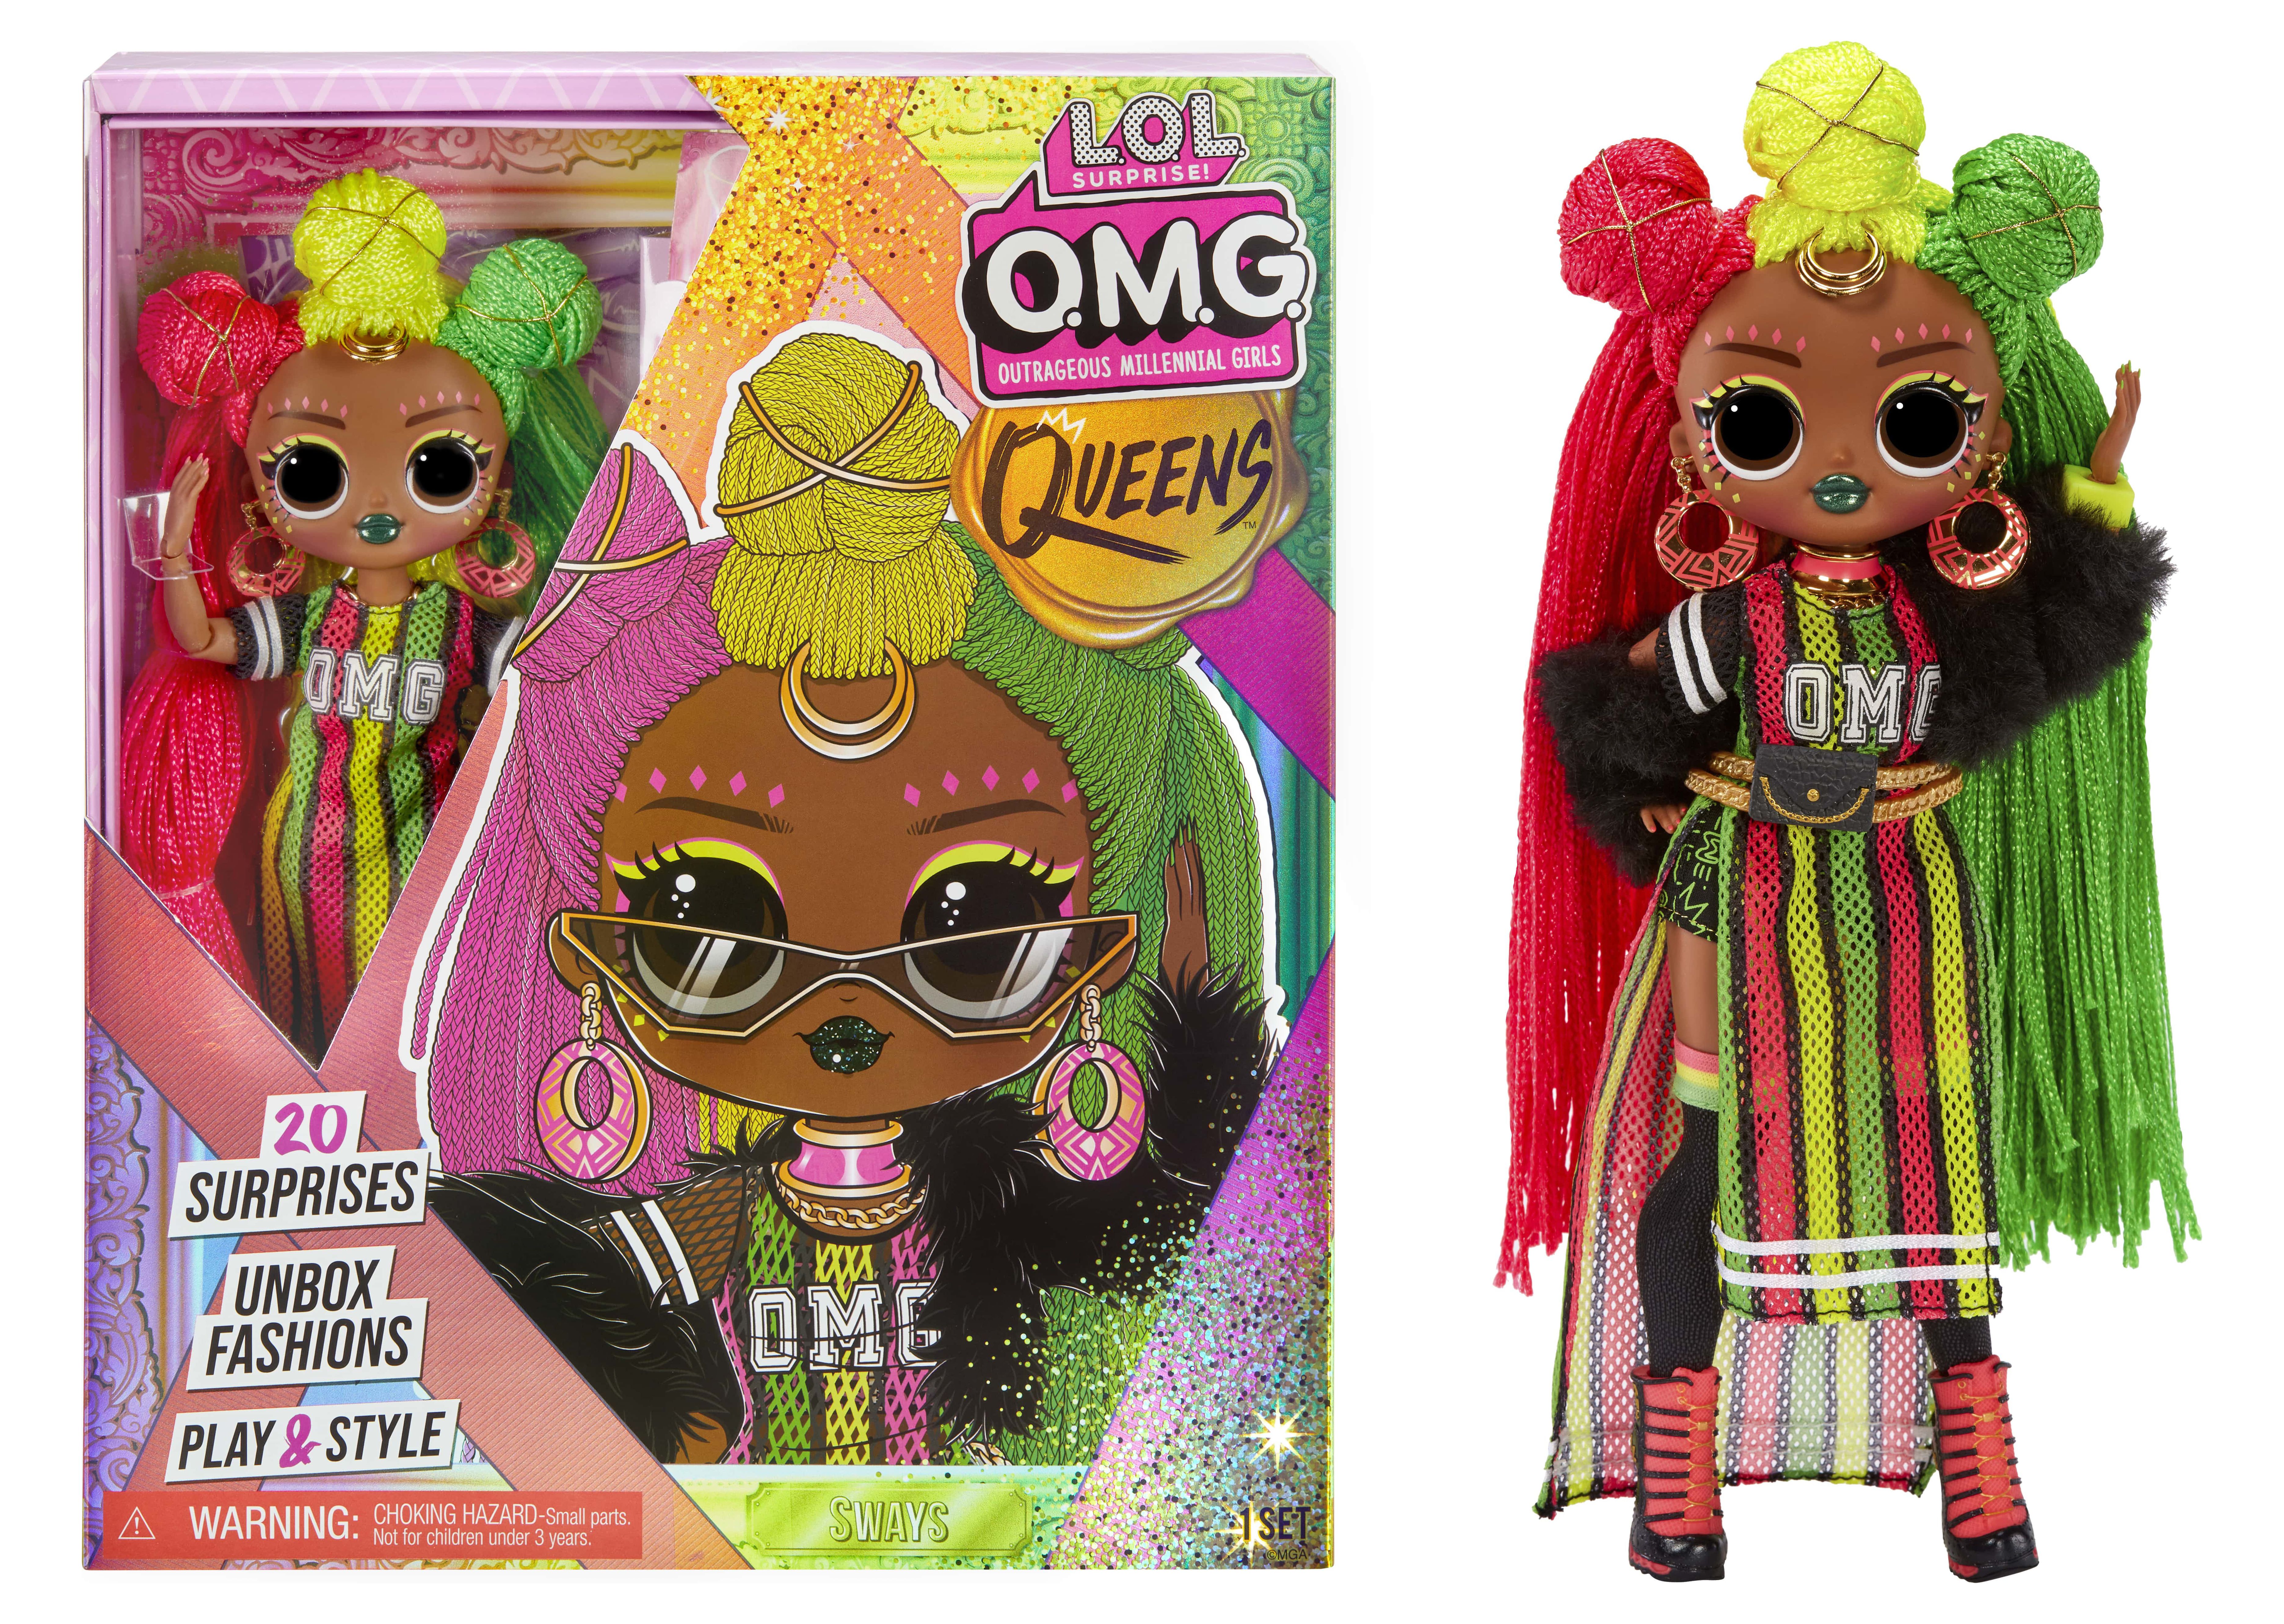 Lol Surprise OMG Queens Sways Fashion Doll with 20 Surprises